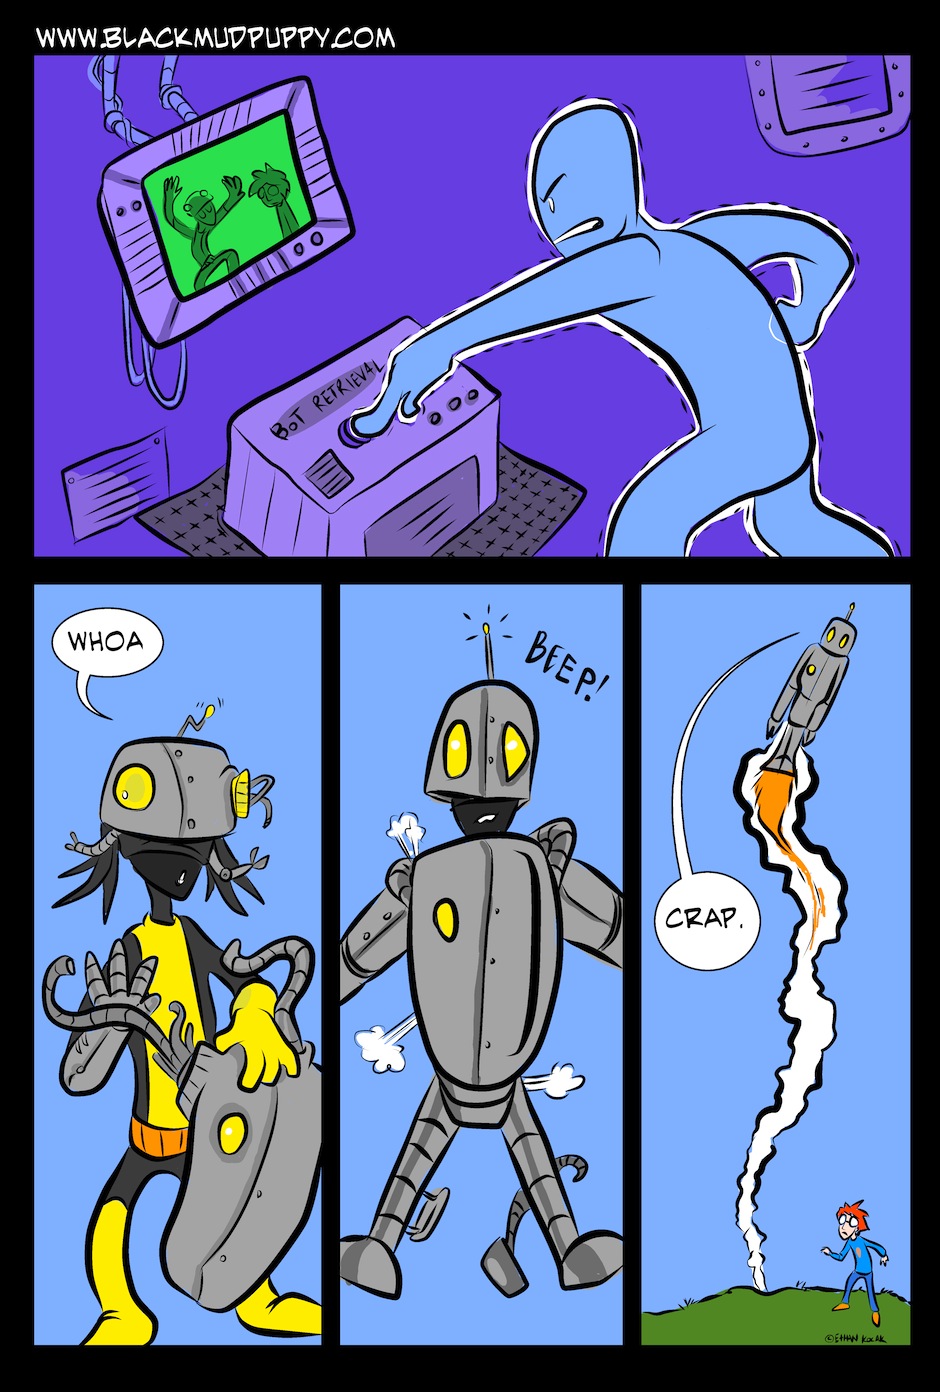 Self cleaning robot is clean.